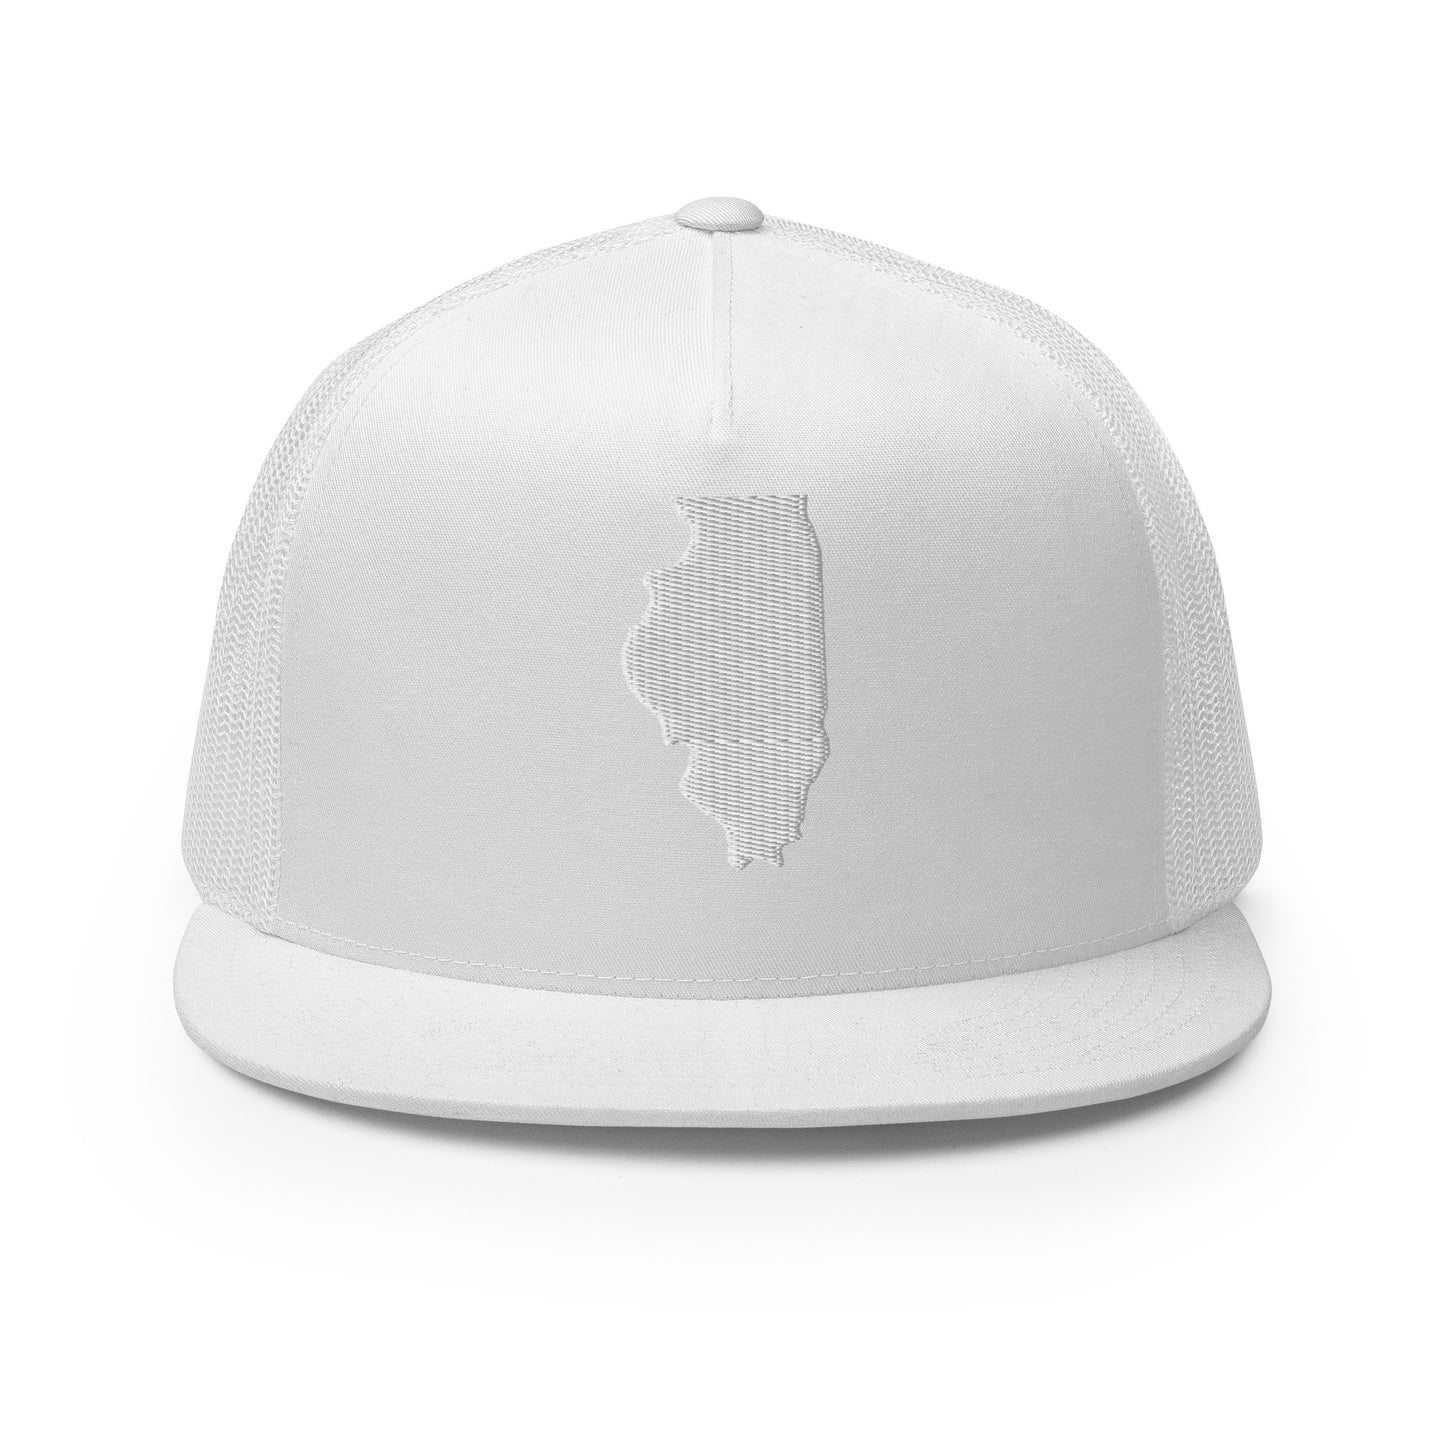 Illinois State Silhouette High 5 Panel A-Frame Snapback Trucker Hat